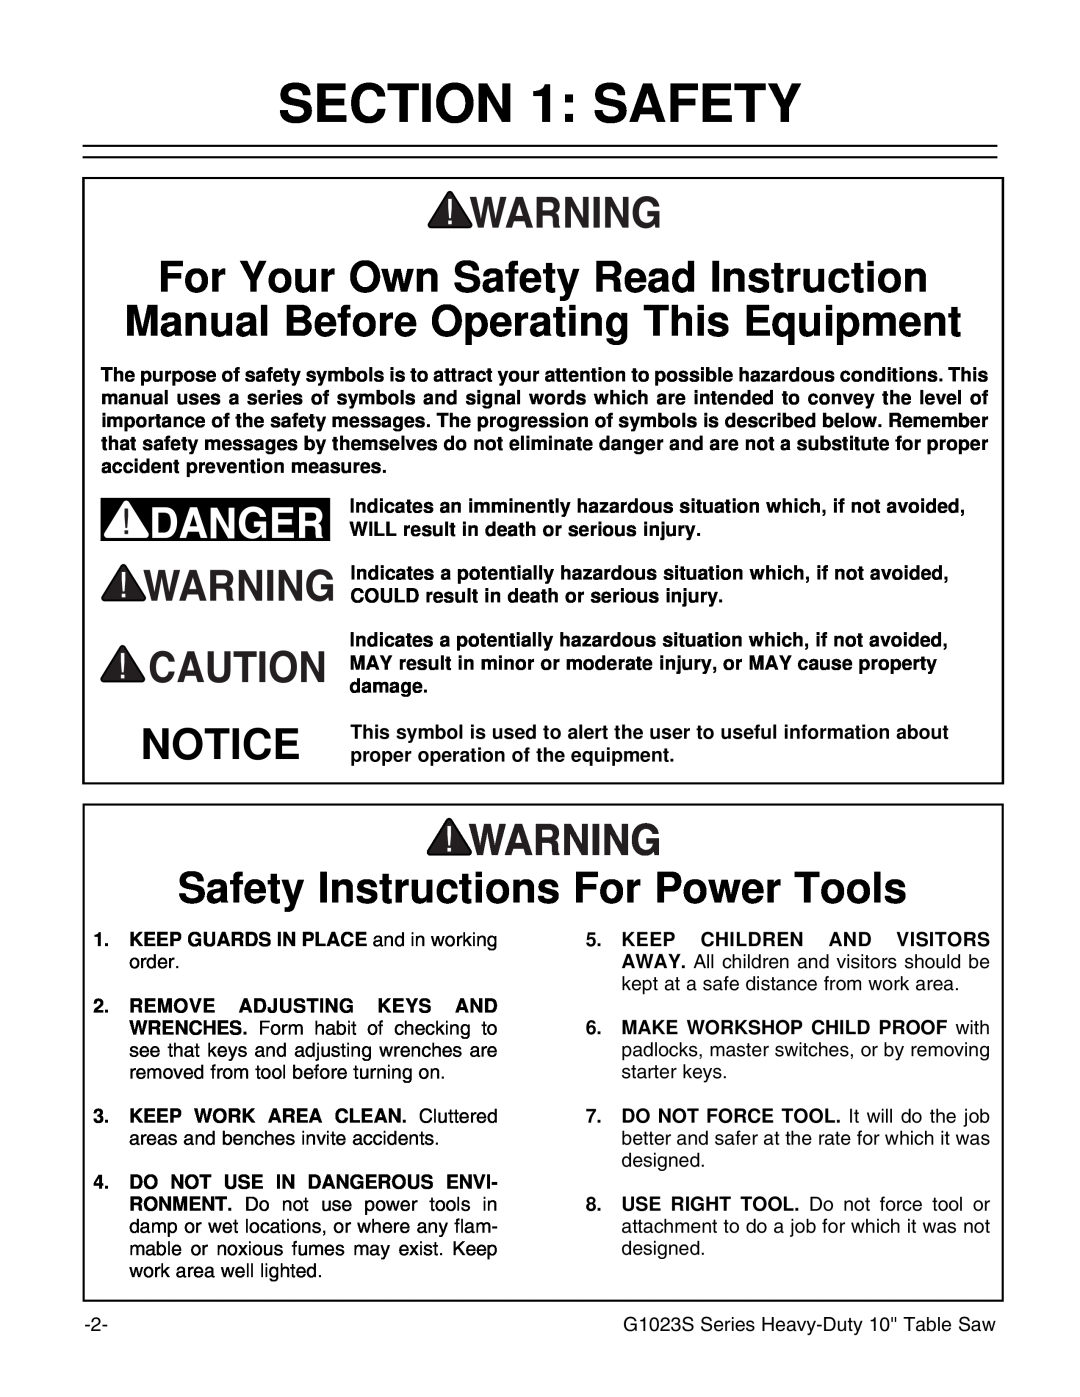 Grizzly MODEL instruction manual Safety Instructions For Power Tools 